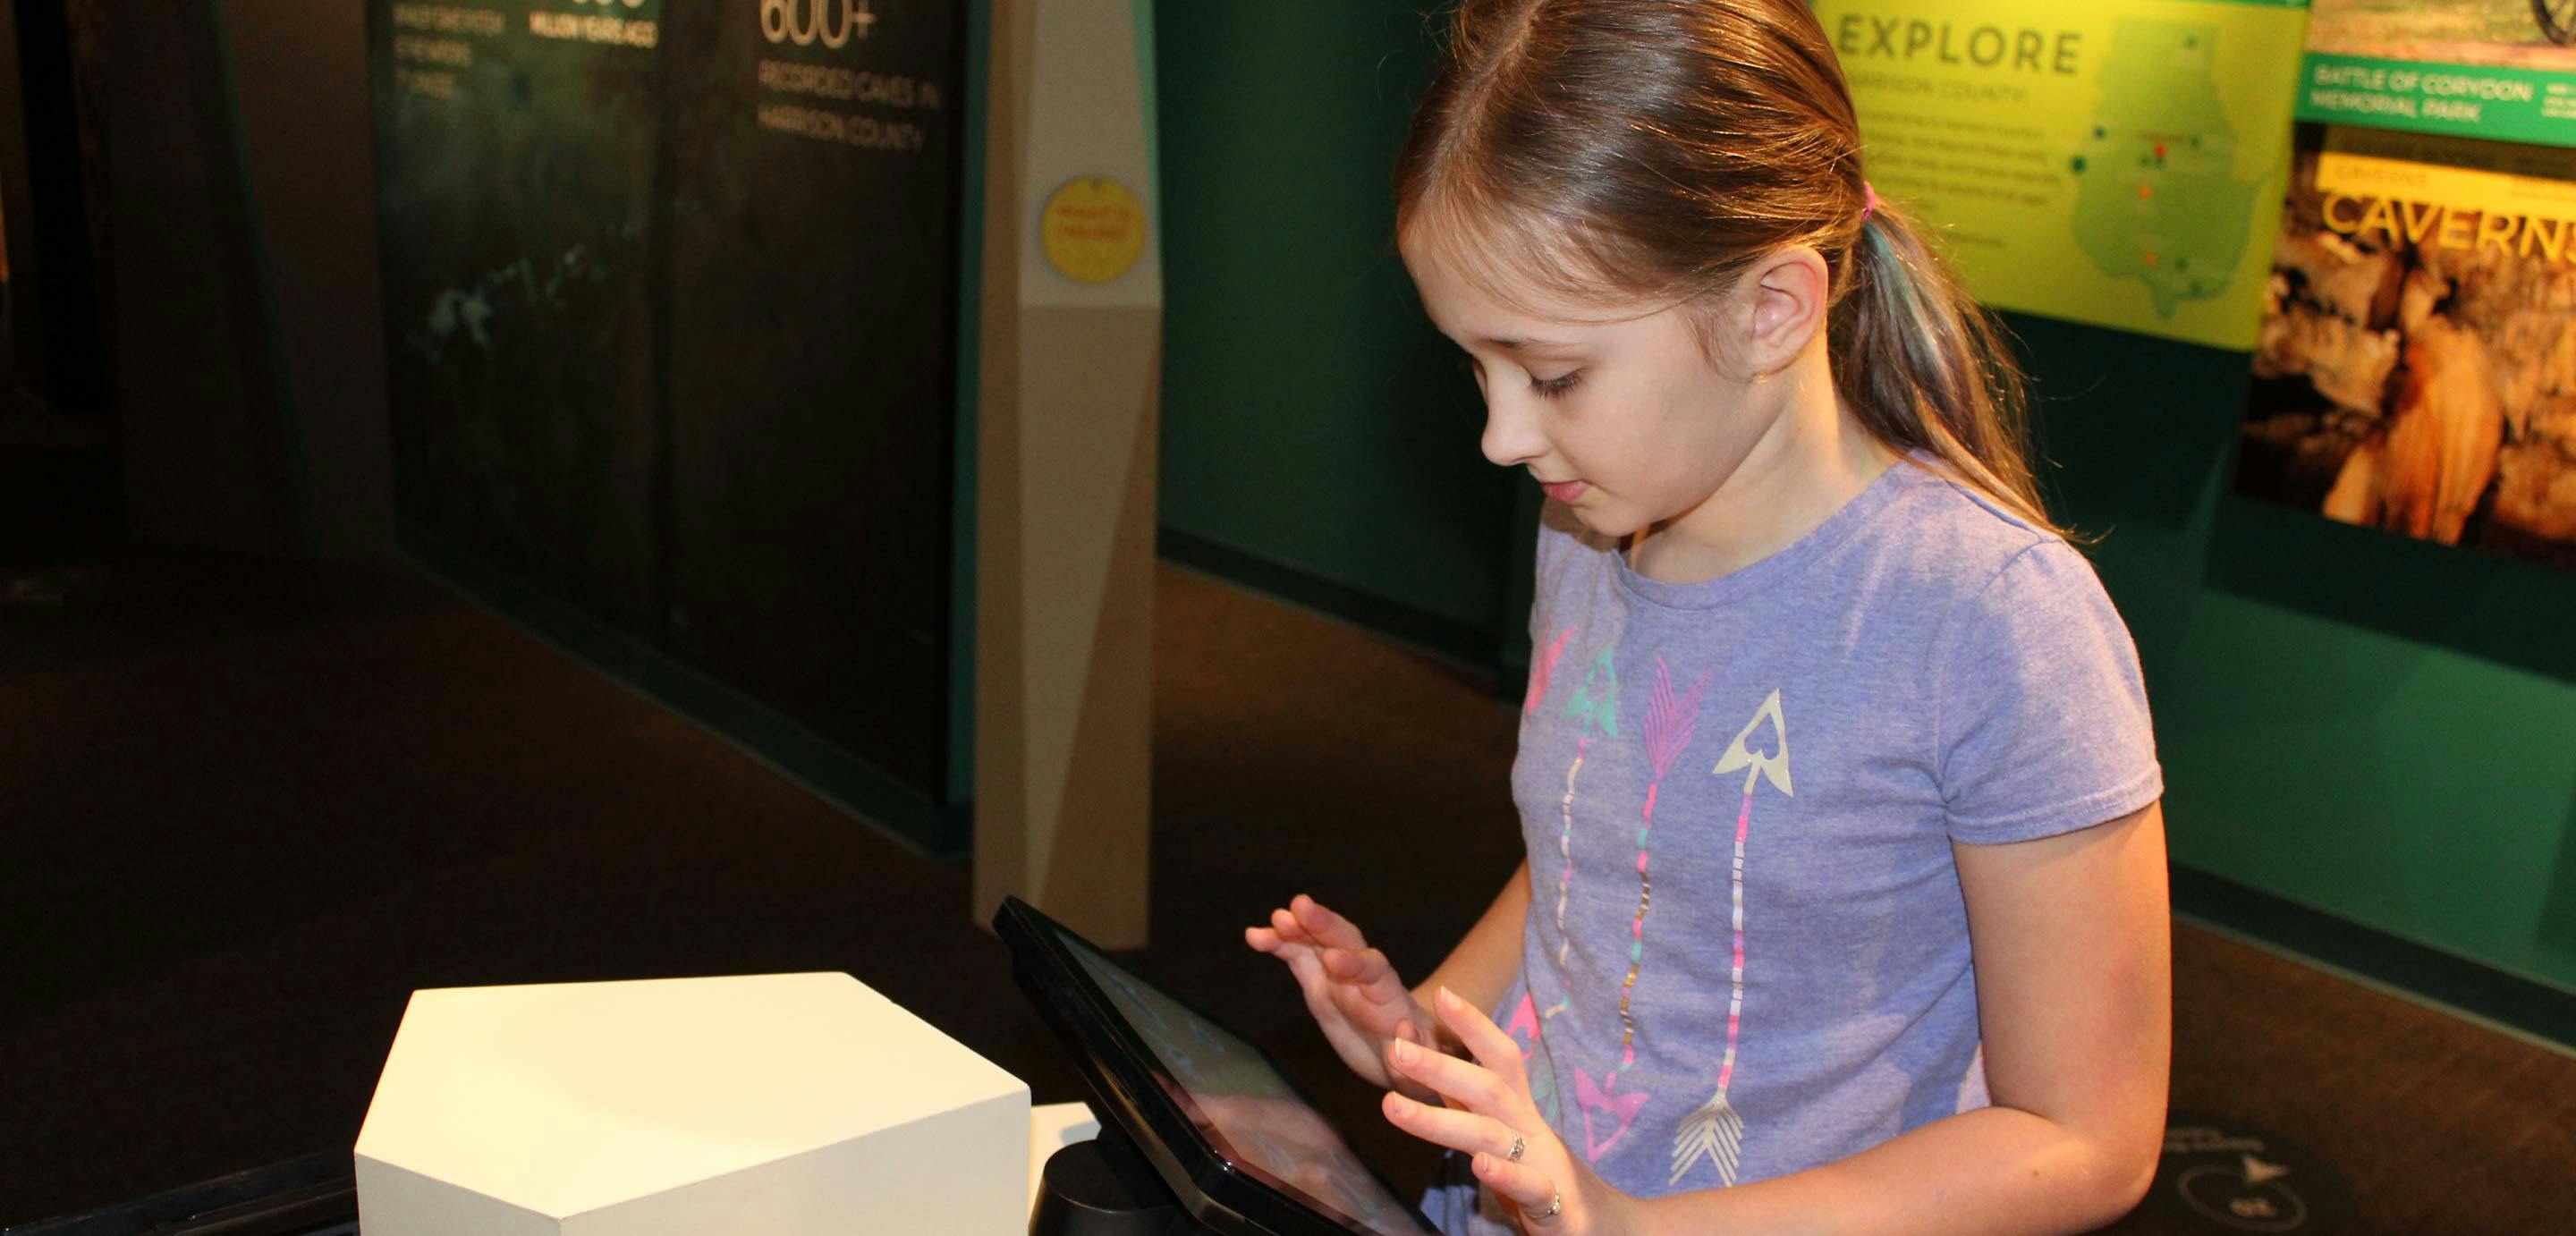 Interactive Touch Exhibits